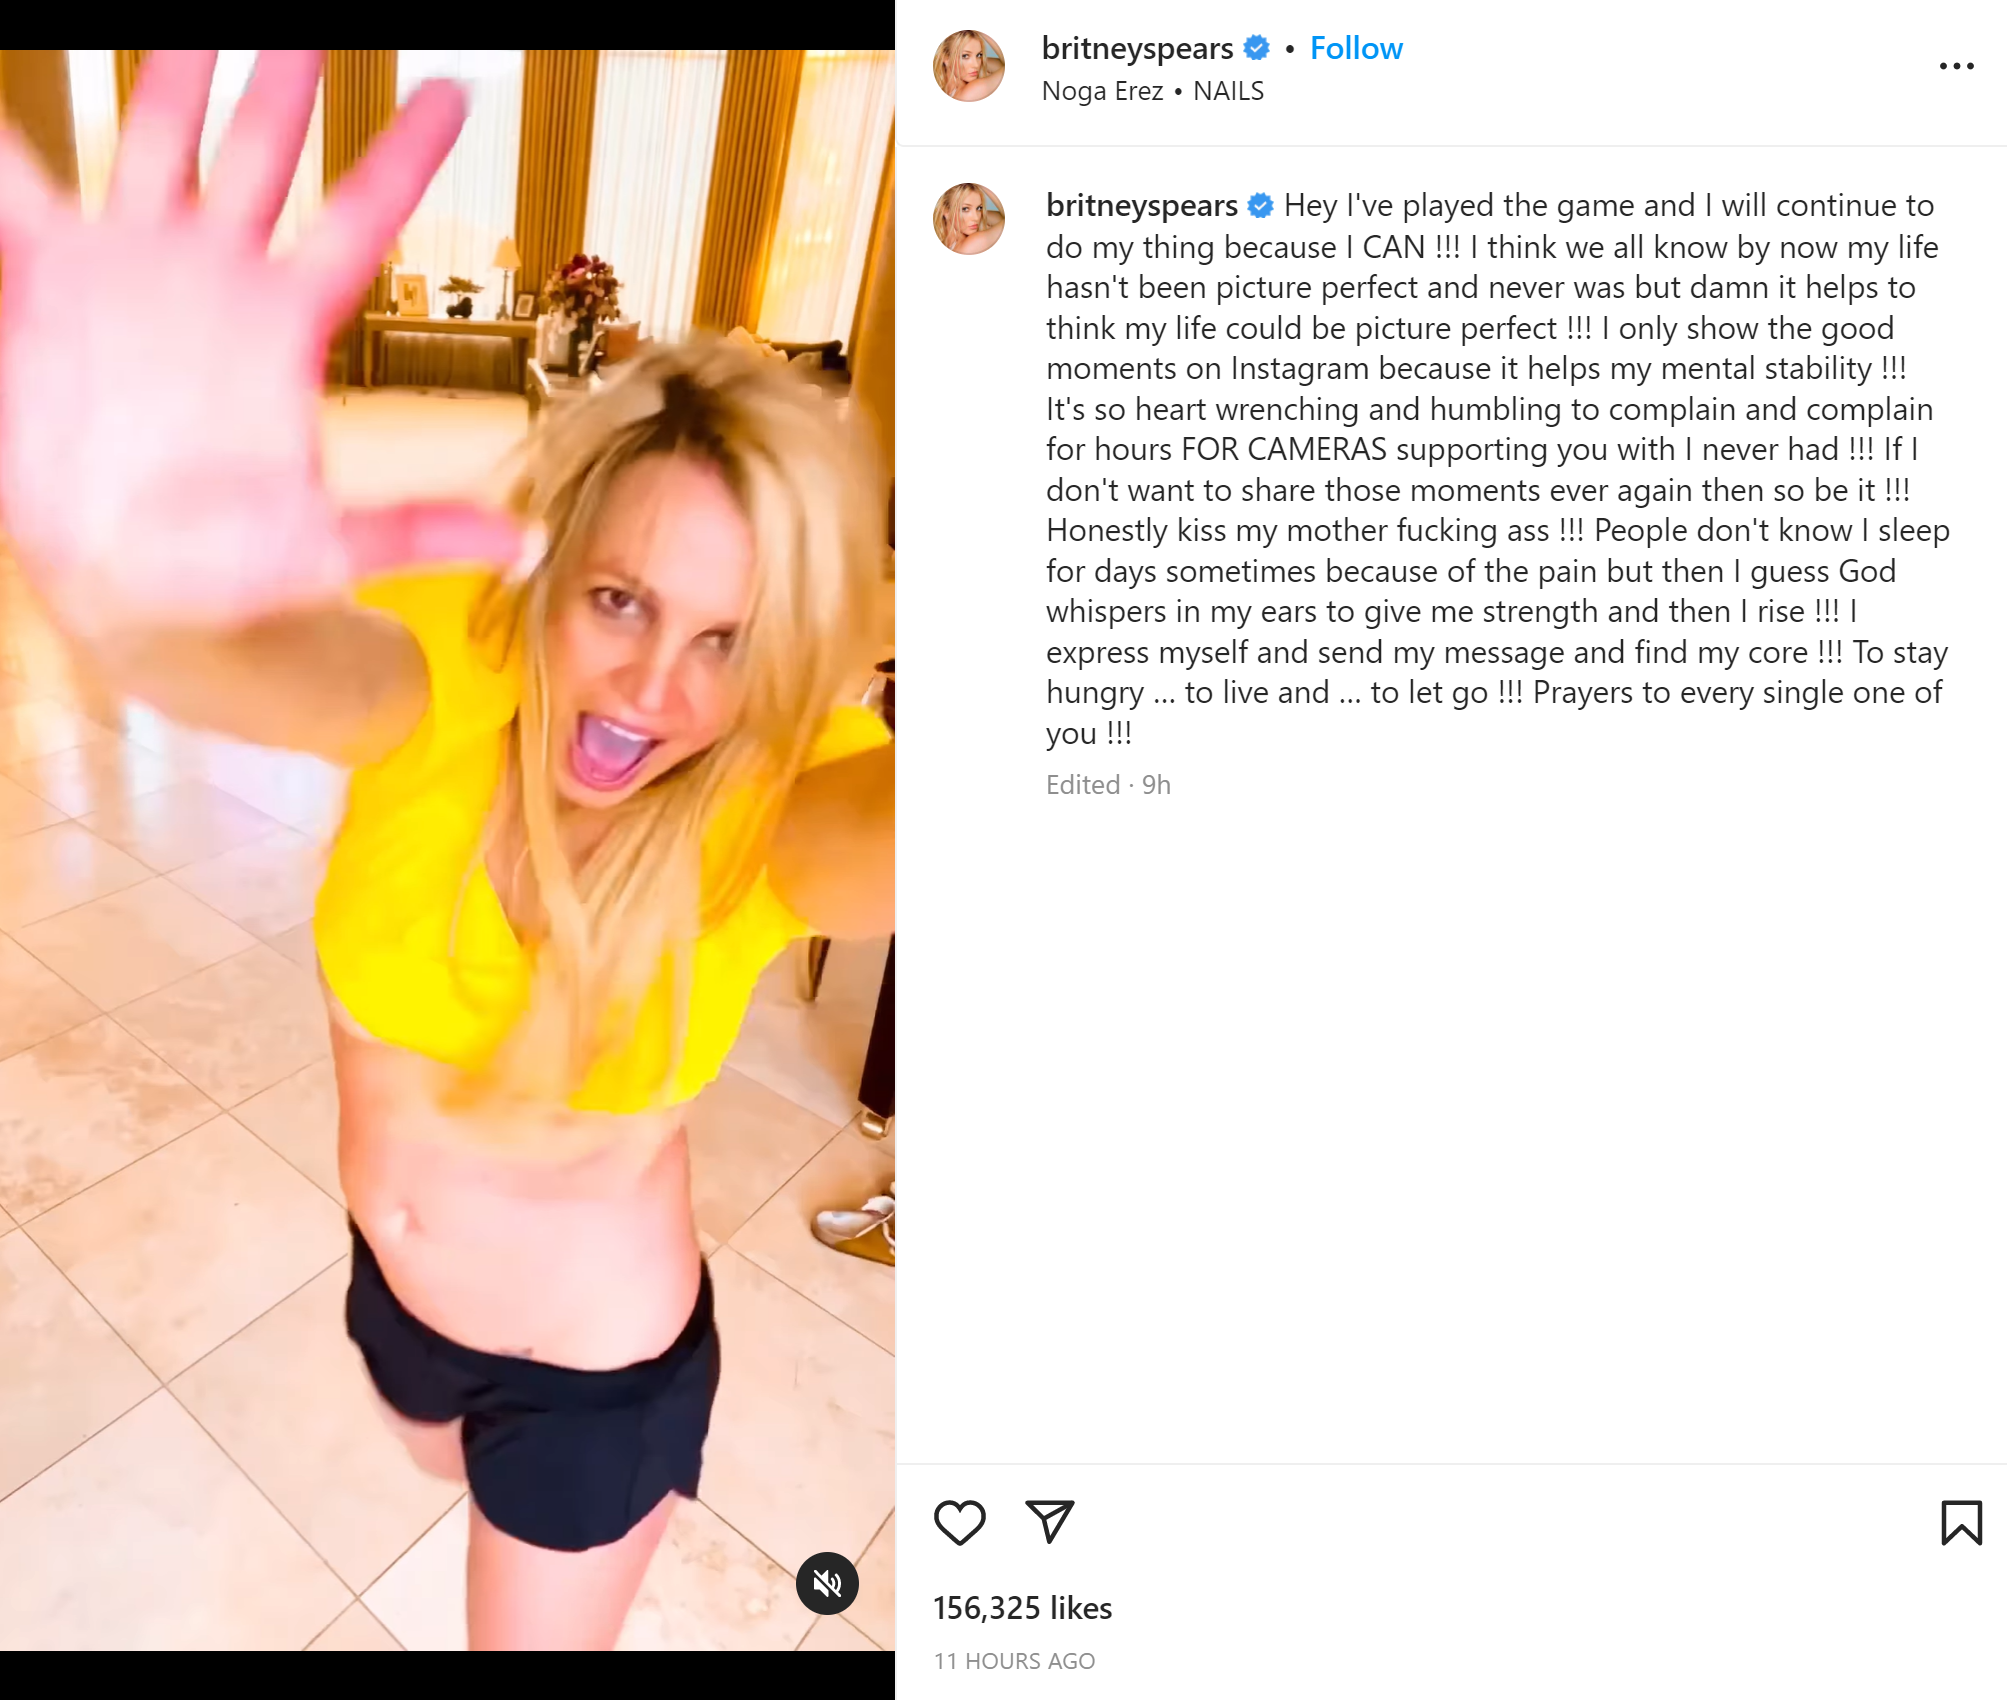 Britney Spears posts a new dancing video